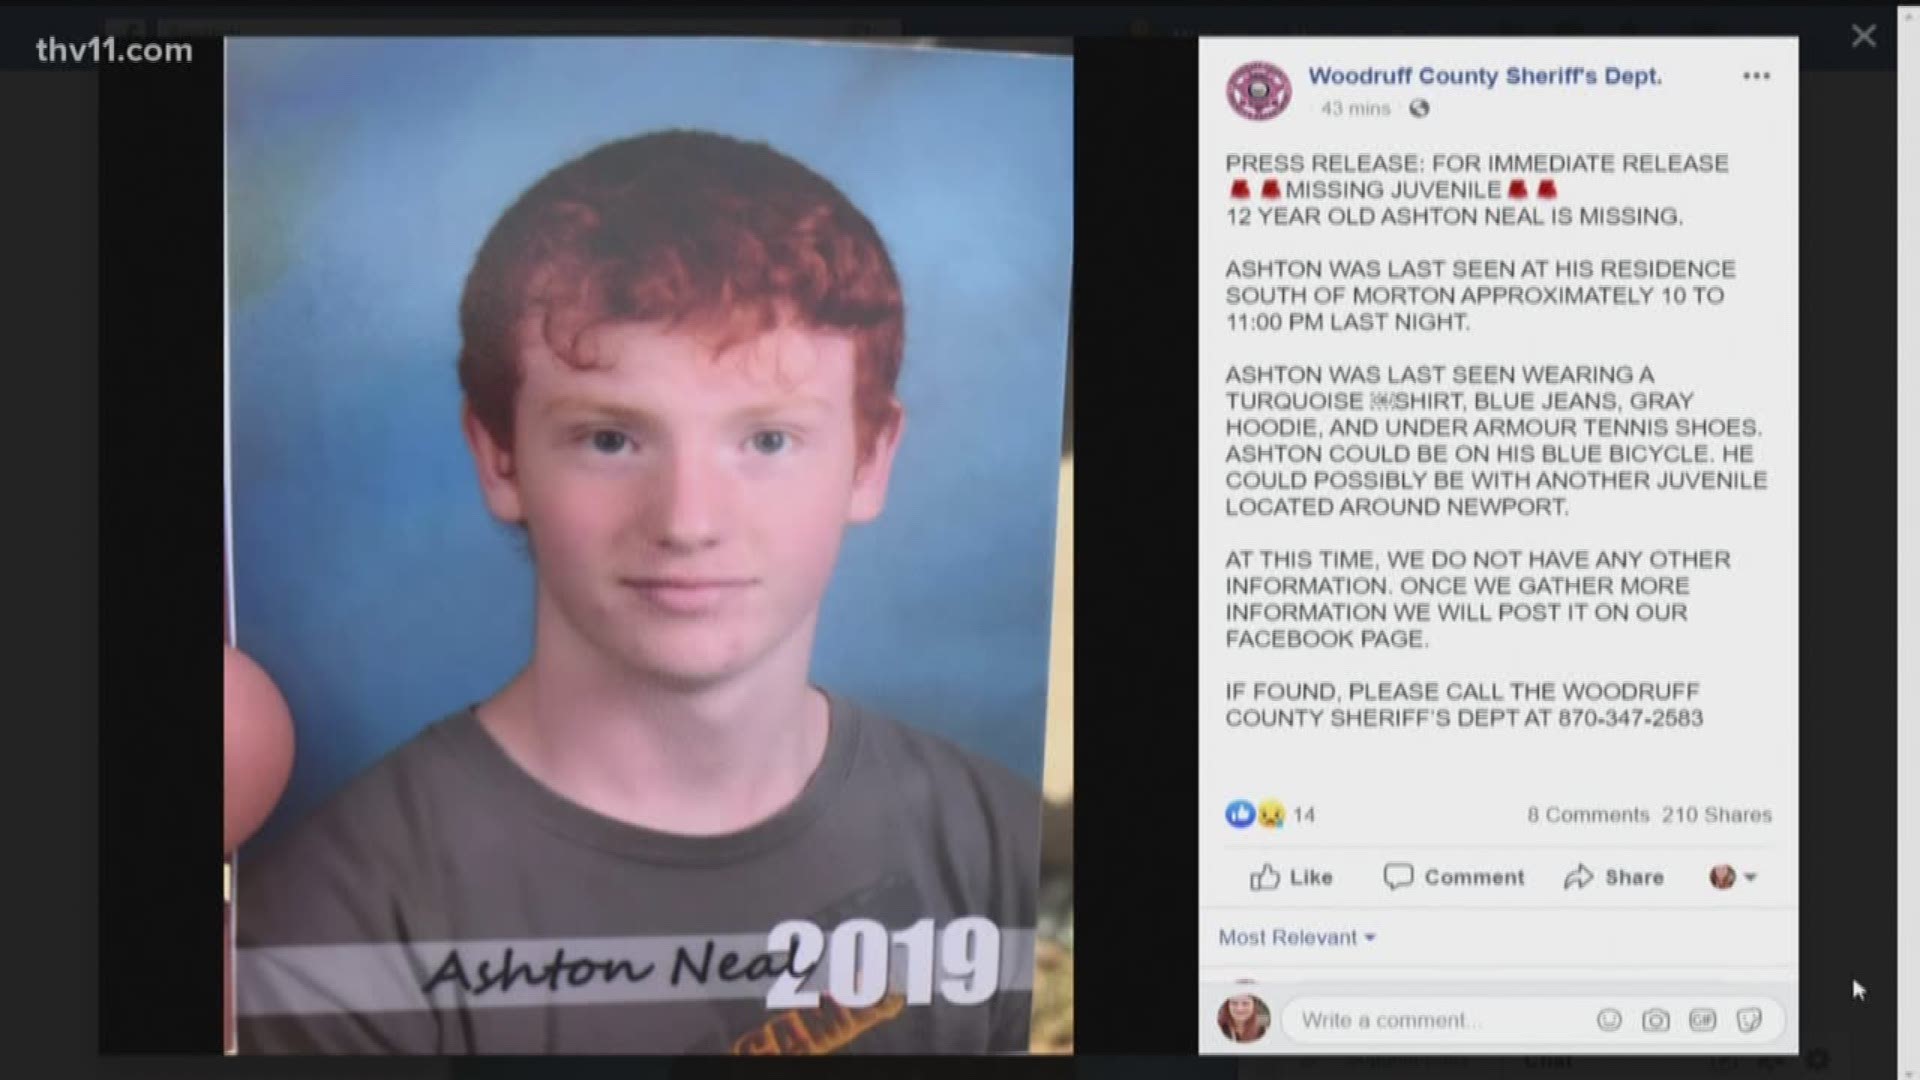 A 12-year-old boy is reported missing out of Woodruff County. His name is Ashton Neal.